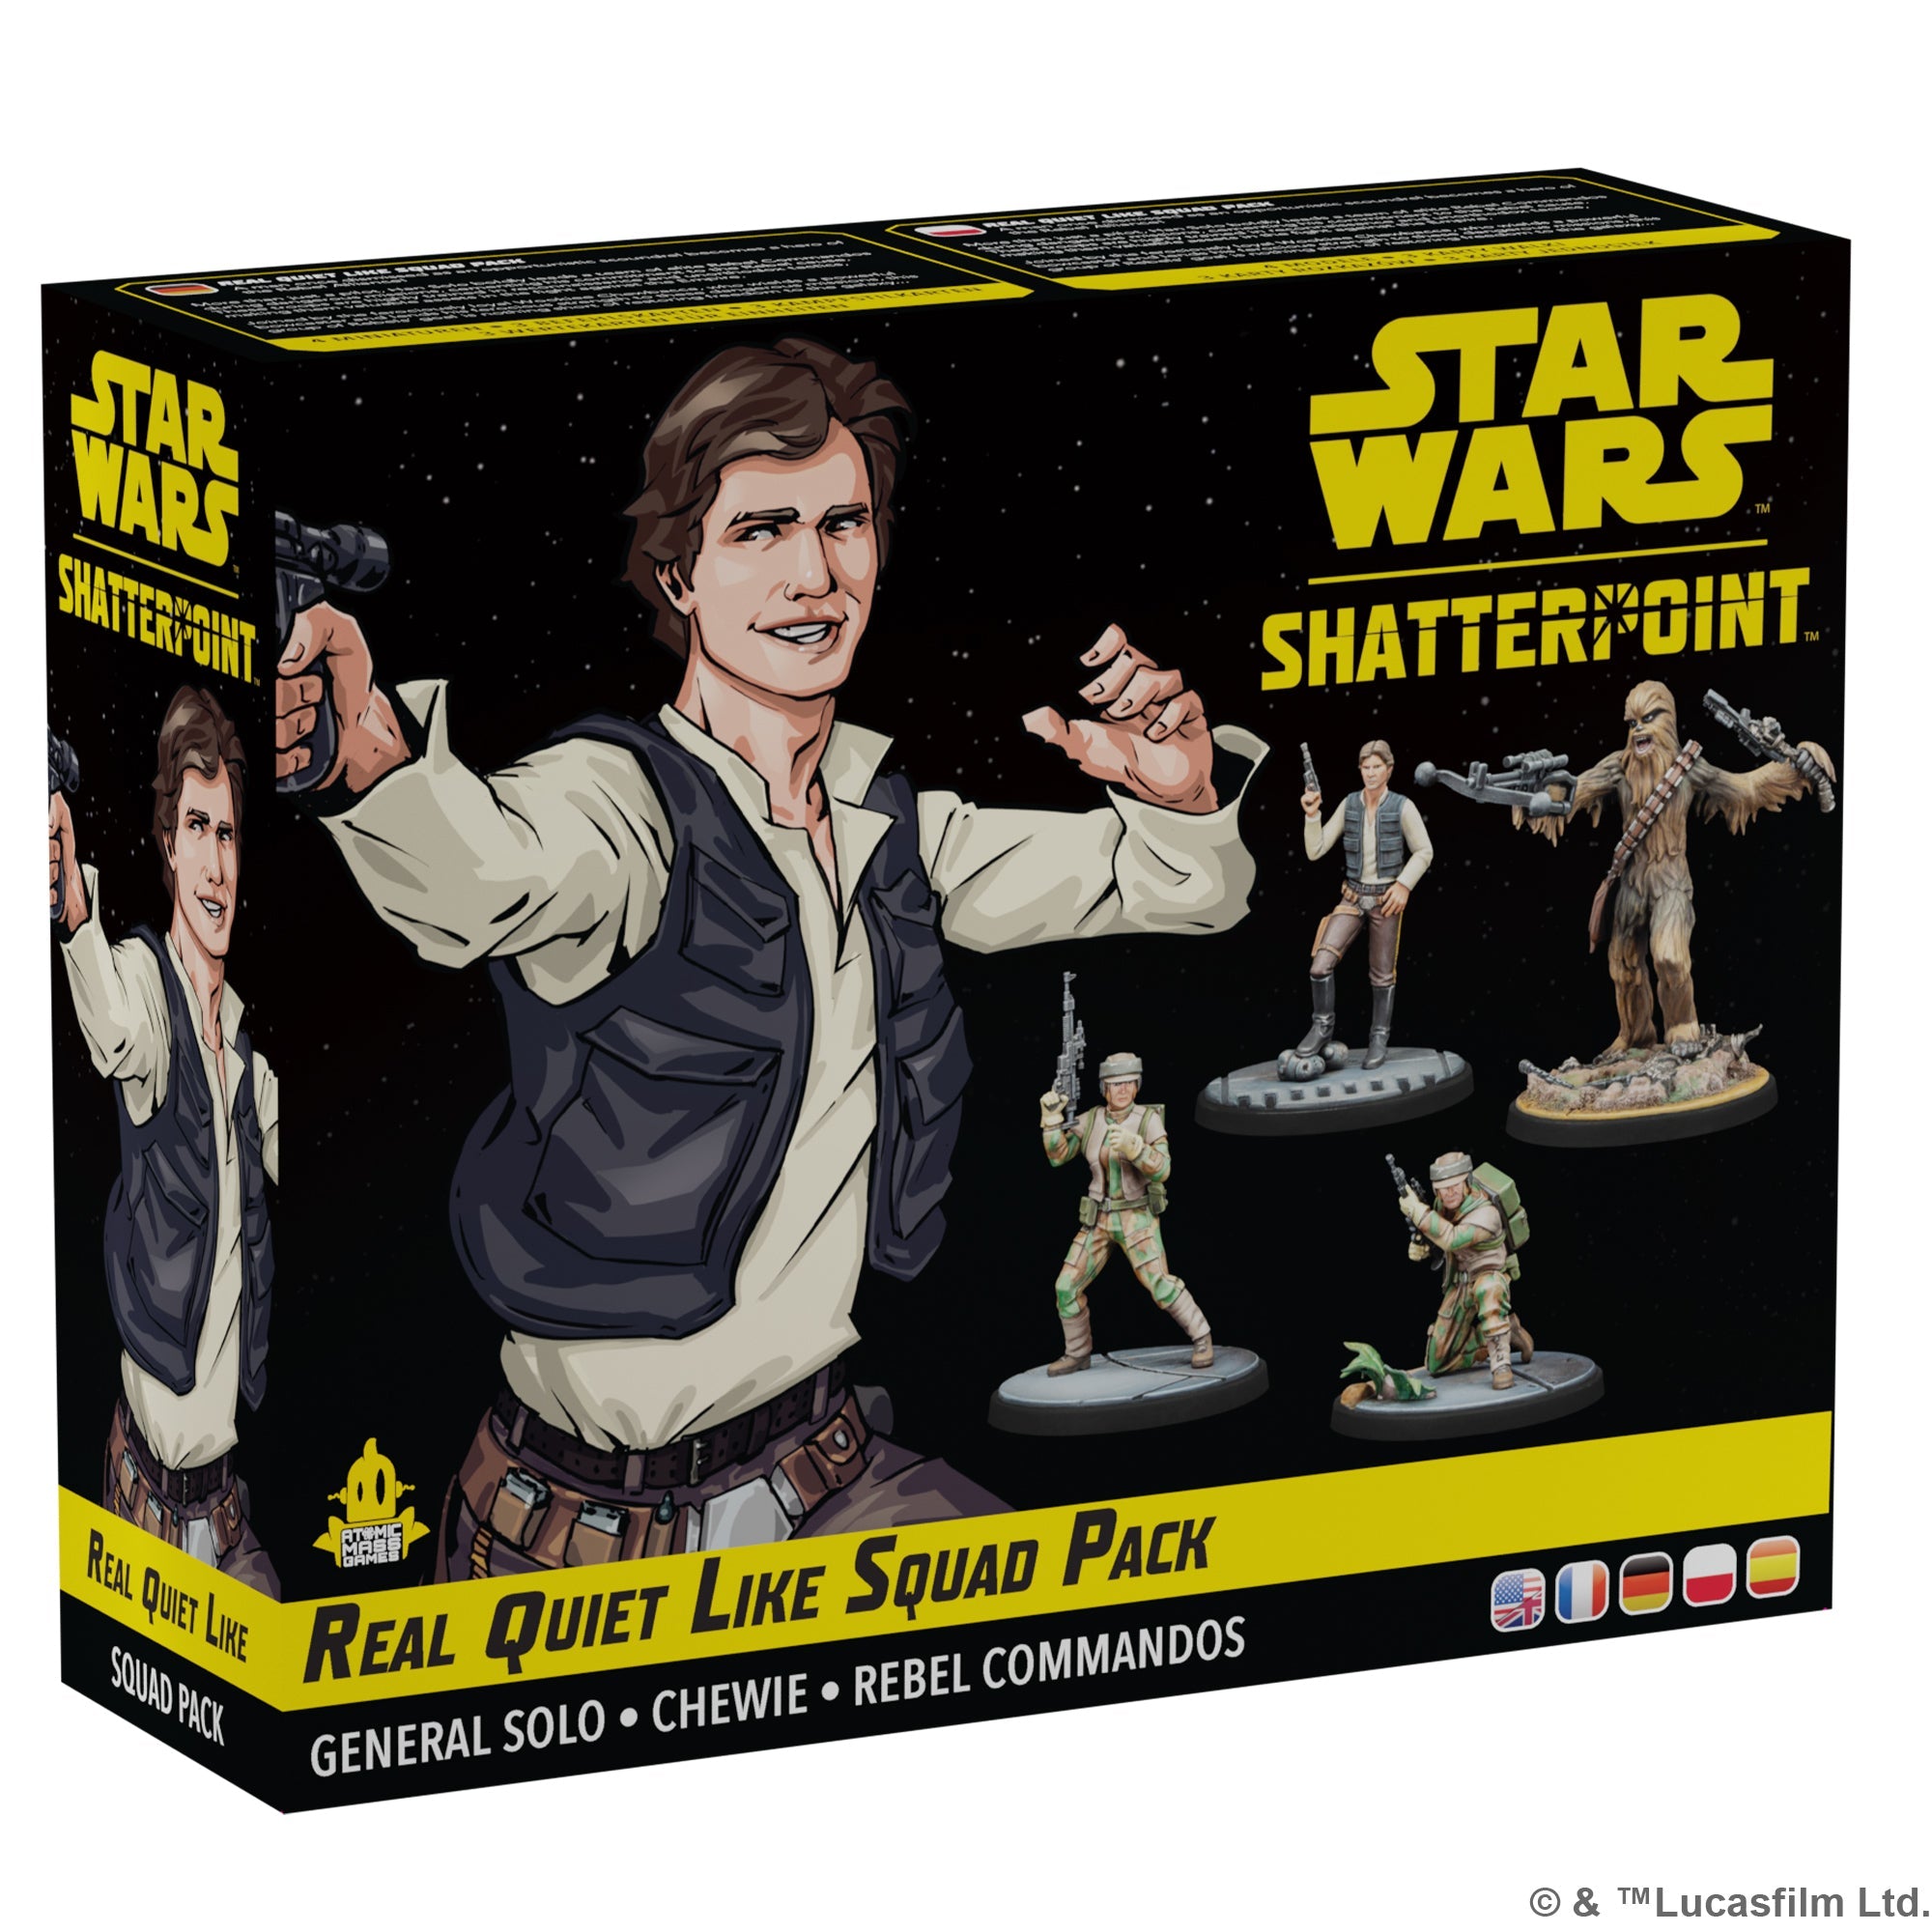 Star Wars Shatterpoint: Real Quiet Like, Han Solo Squad Pack [June 7]